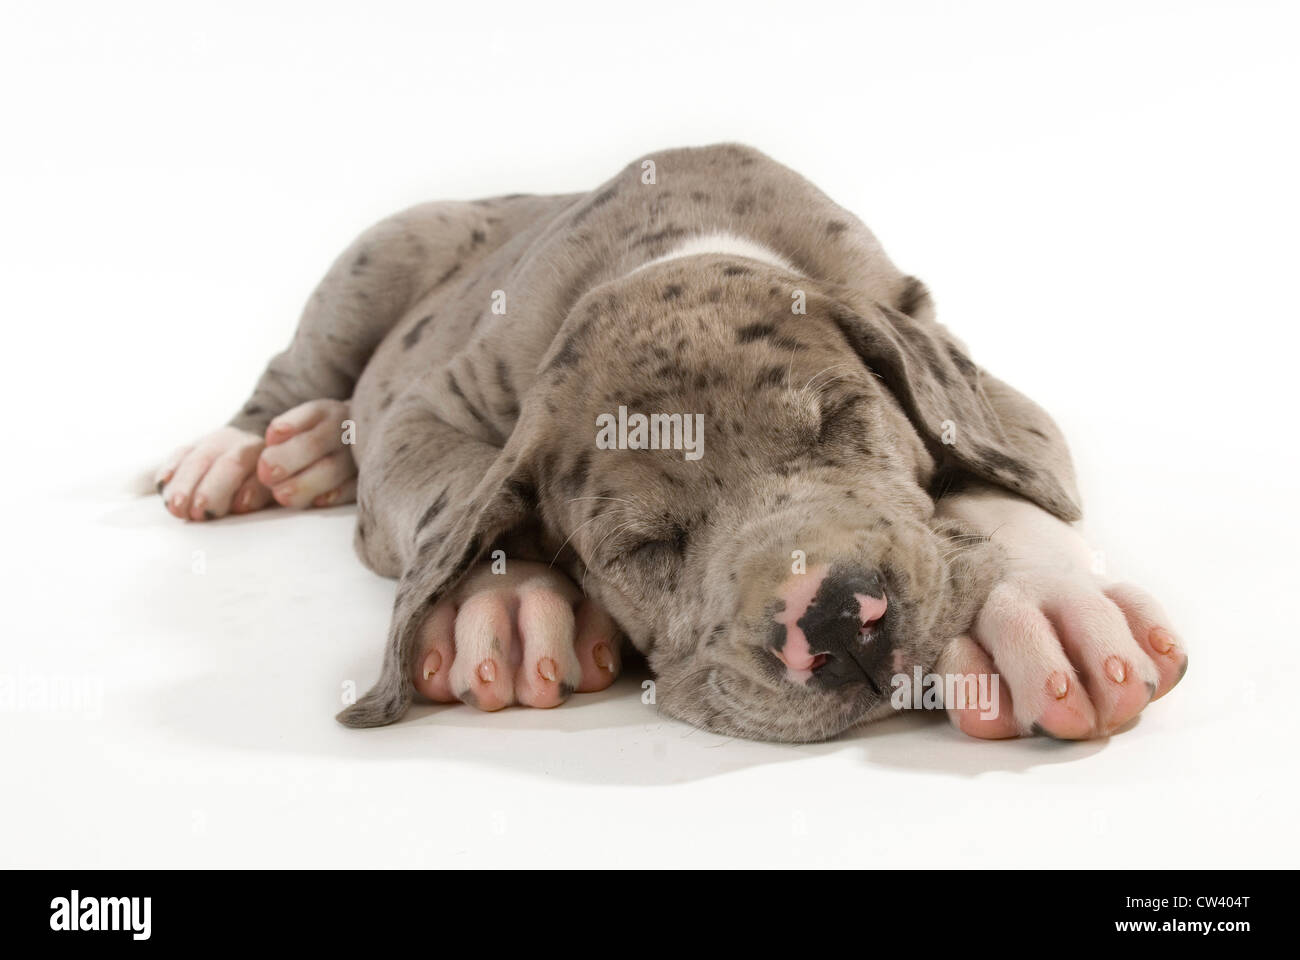 Great Dane. Puppy sleeping. Studio picture against a white background Stock Photo